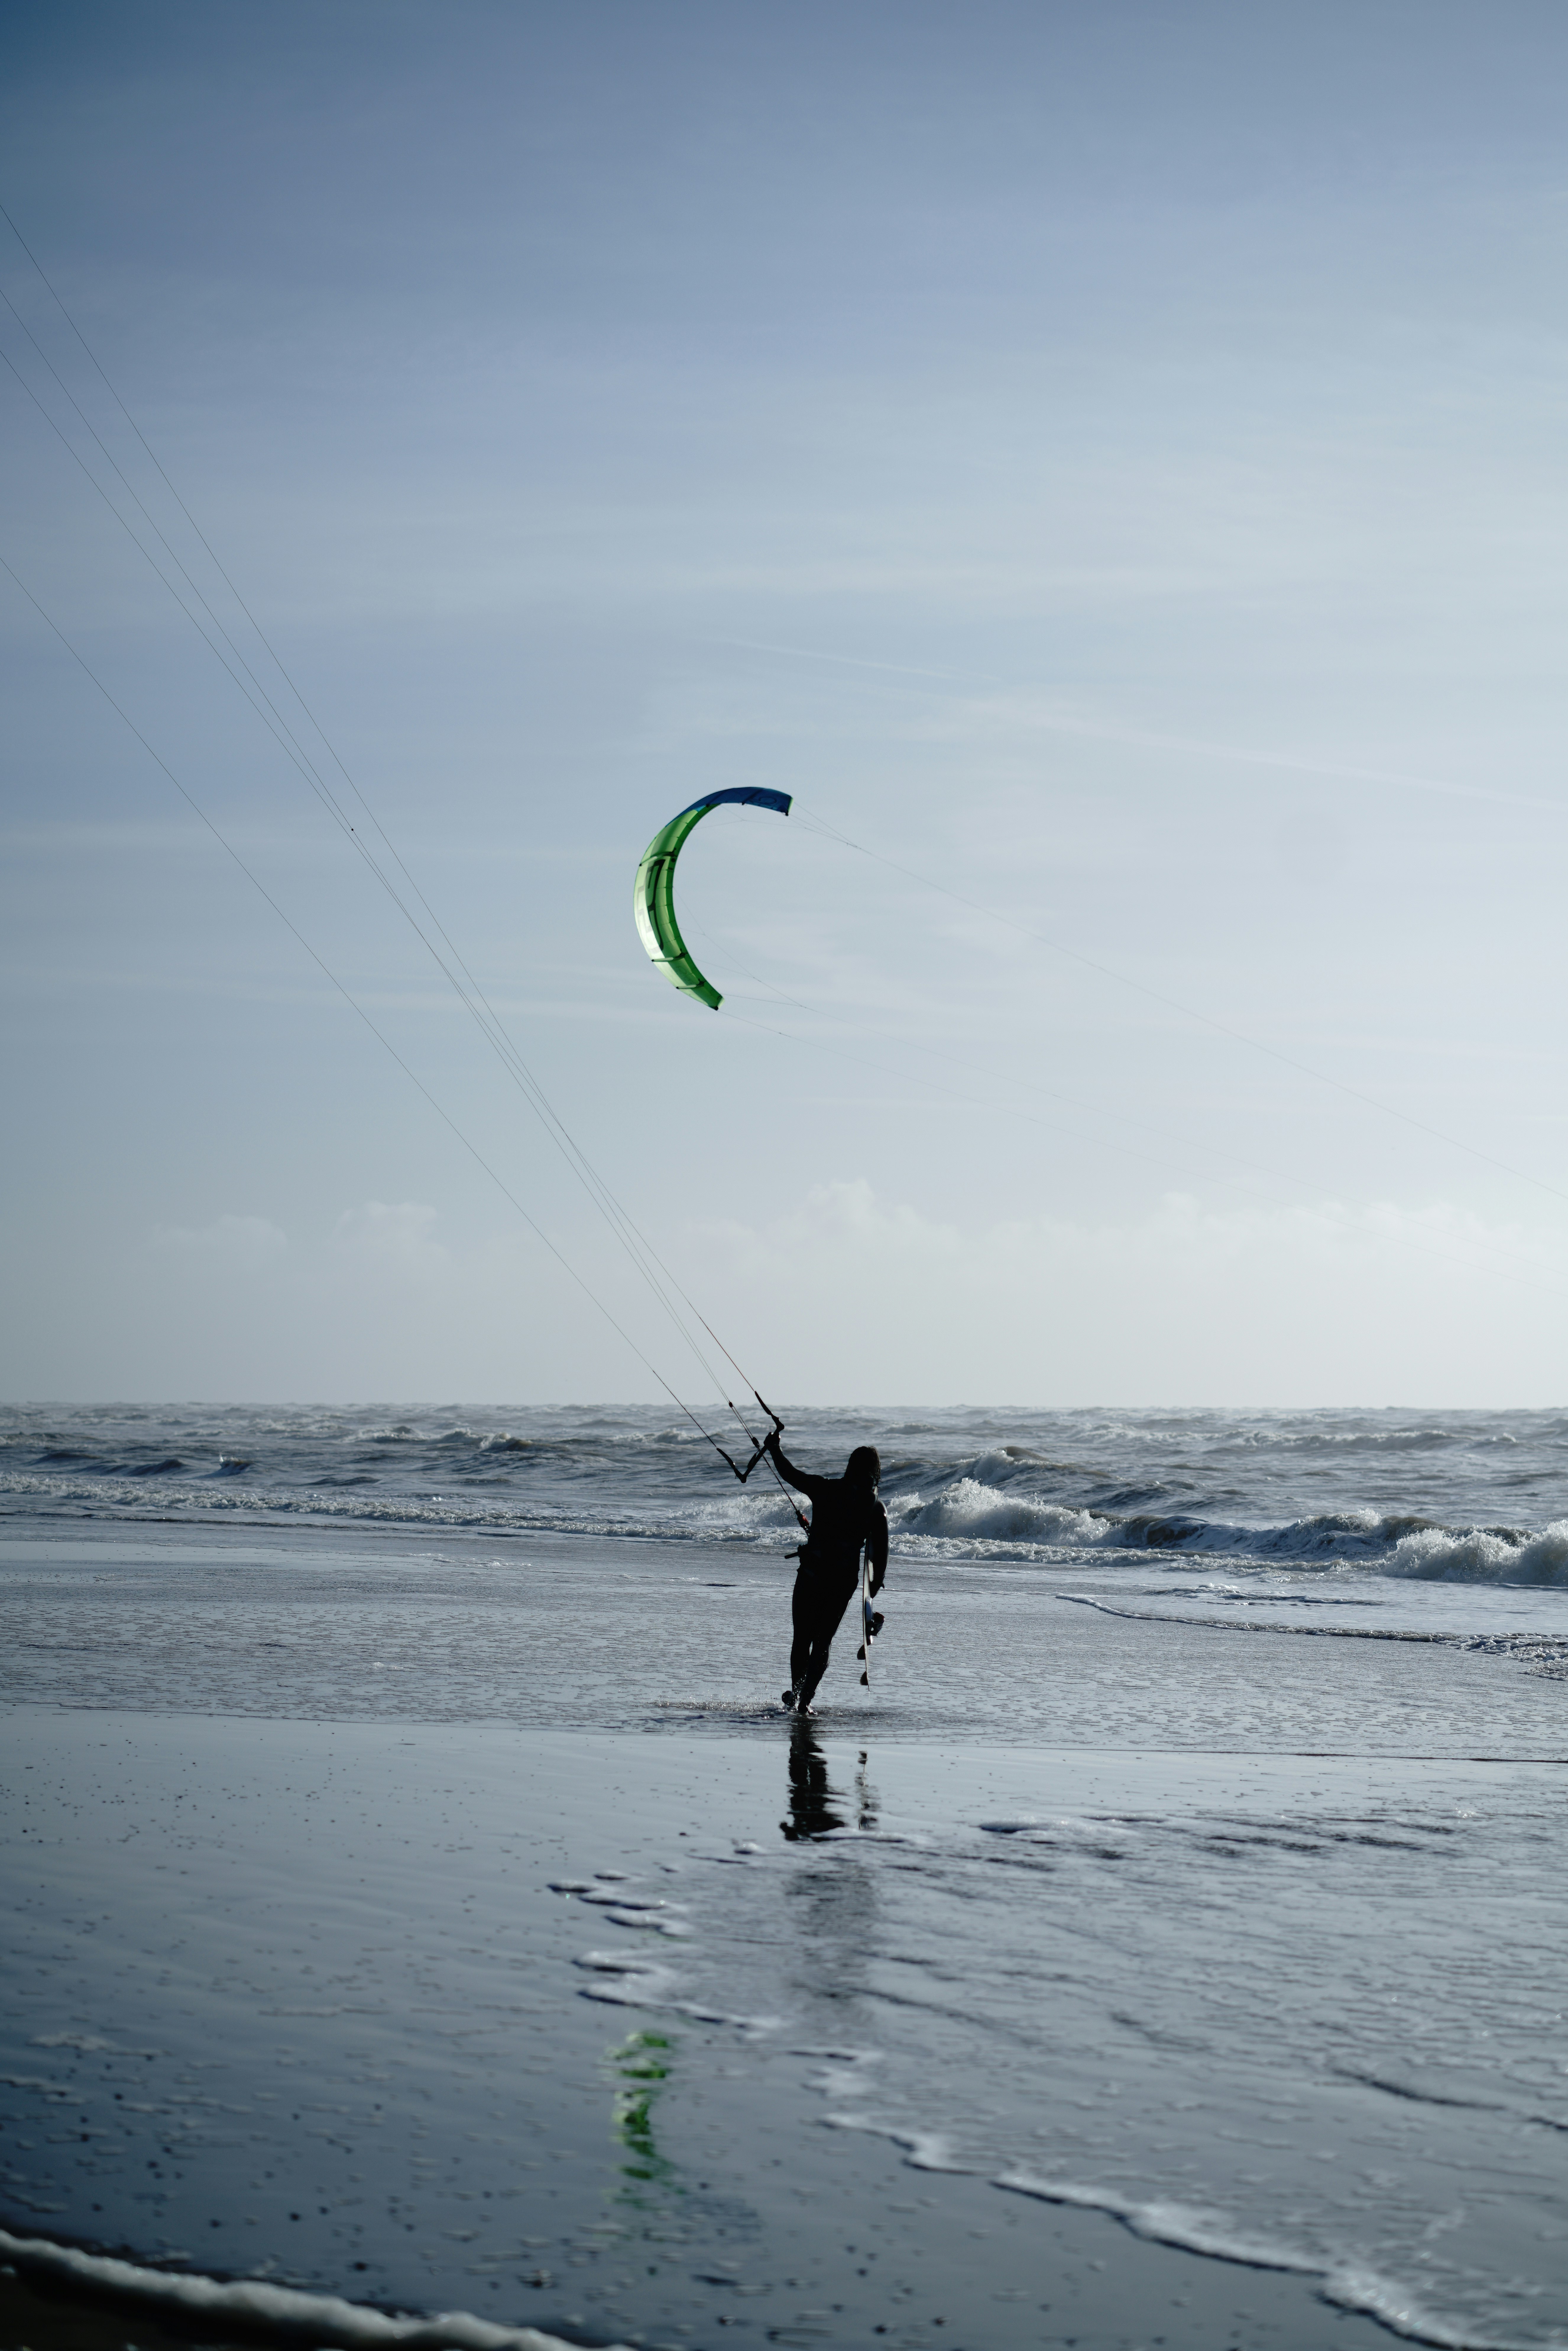 silhouette of man holding kite surfing on sea during daytime